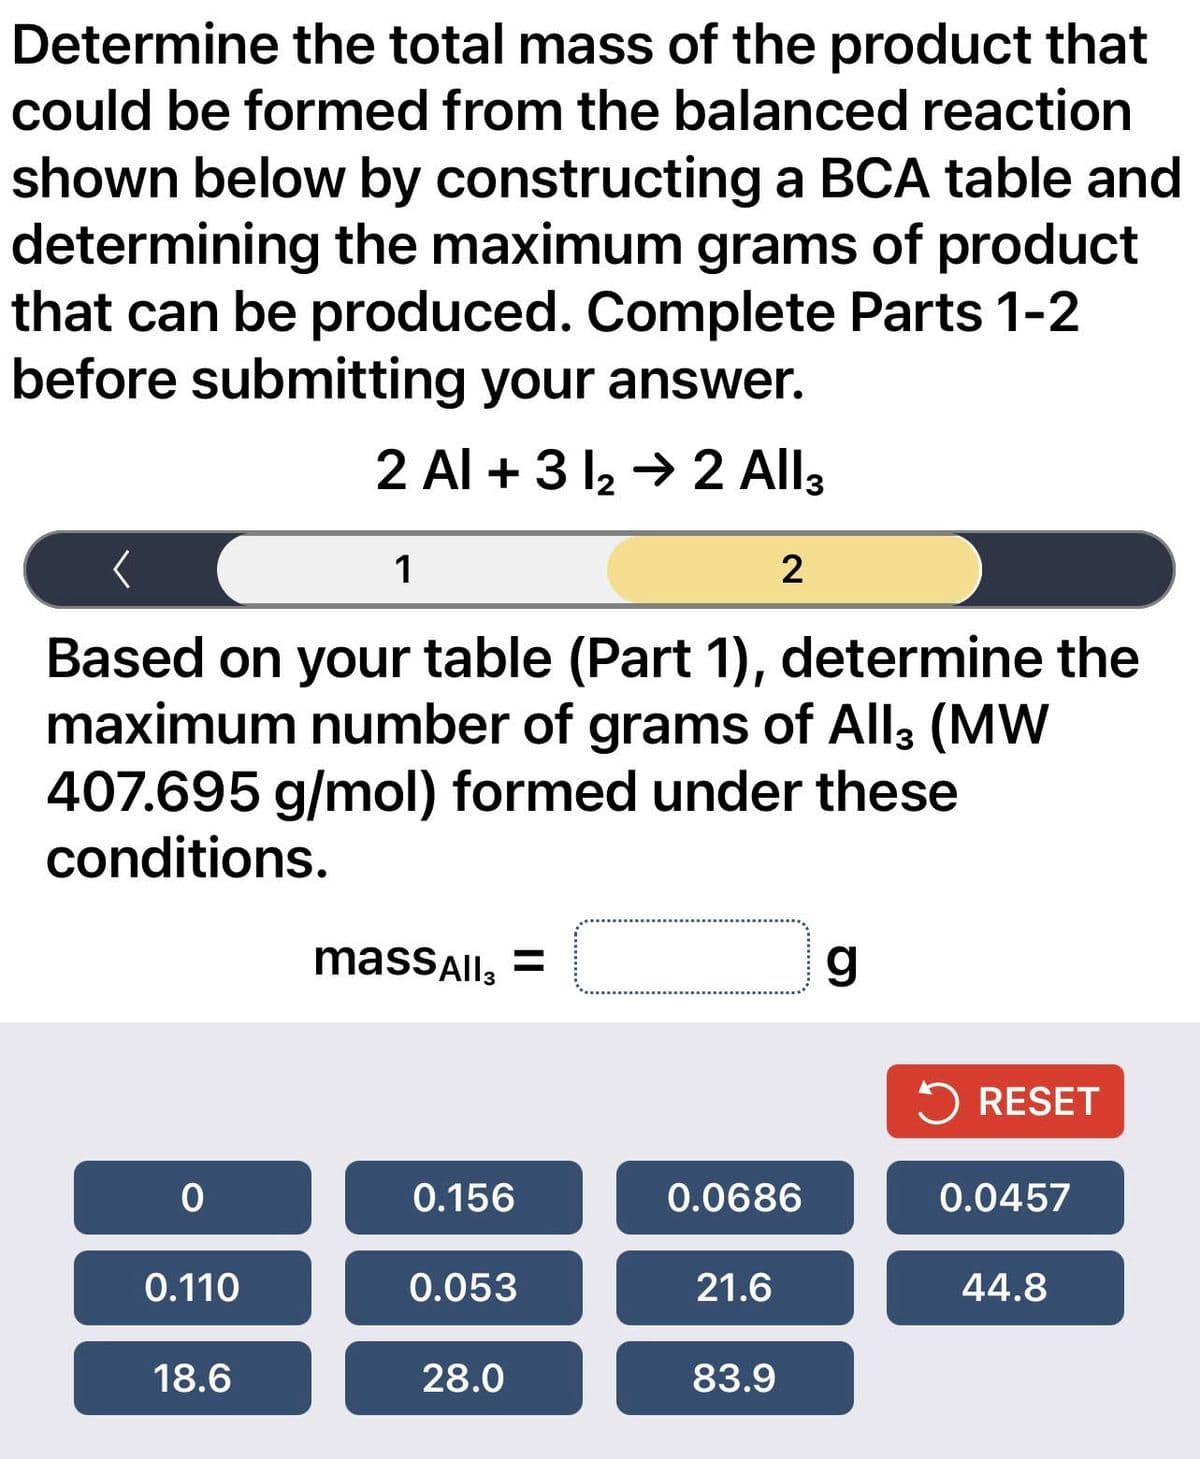 Determine the total mass of the product that
could be formed from the balanced reaction
shown below by constructing a BCA table and
determining the maximum grams of product
that can be produced. Complete Parts 1-2
before submitting your answer.
2 Al +3 1₂ → 2 All 3
0
Based on your table (Part 1), determine the
maximum number of grams of All3 (MW
407.695 g/mol) formed under these
conditions.
0.110
1
18.6
massAll3 =
0.156
0.053
28.0
2
0.0686
21.6
83.9
g
RESET
0.0457
44.8